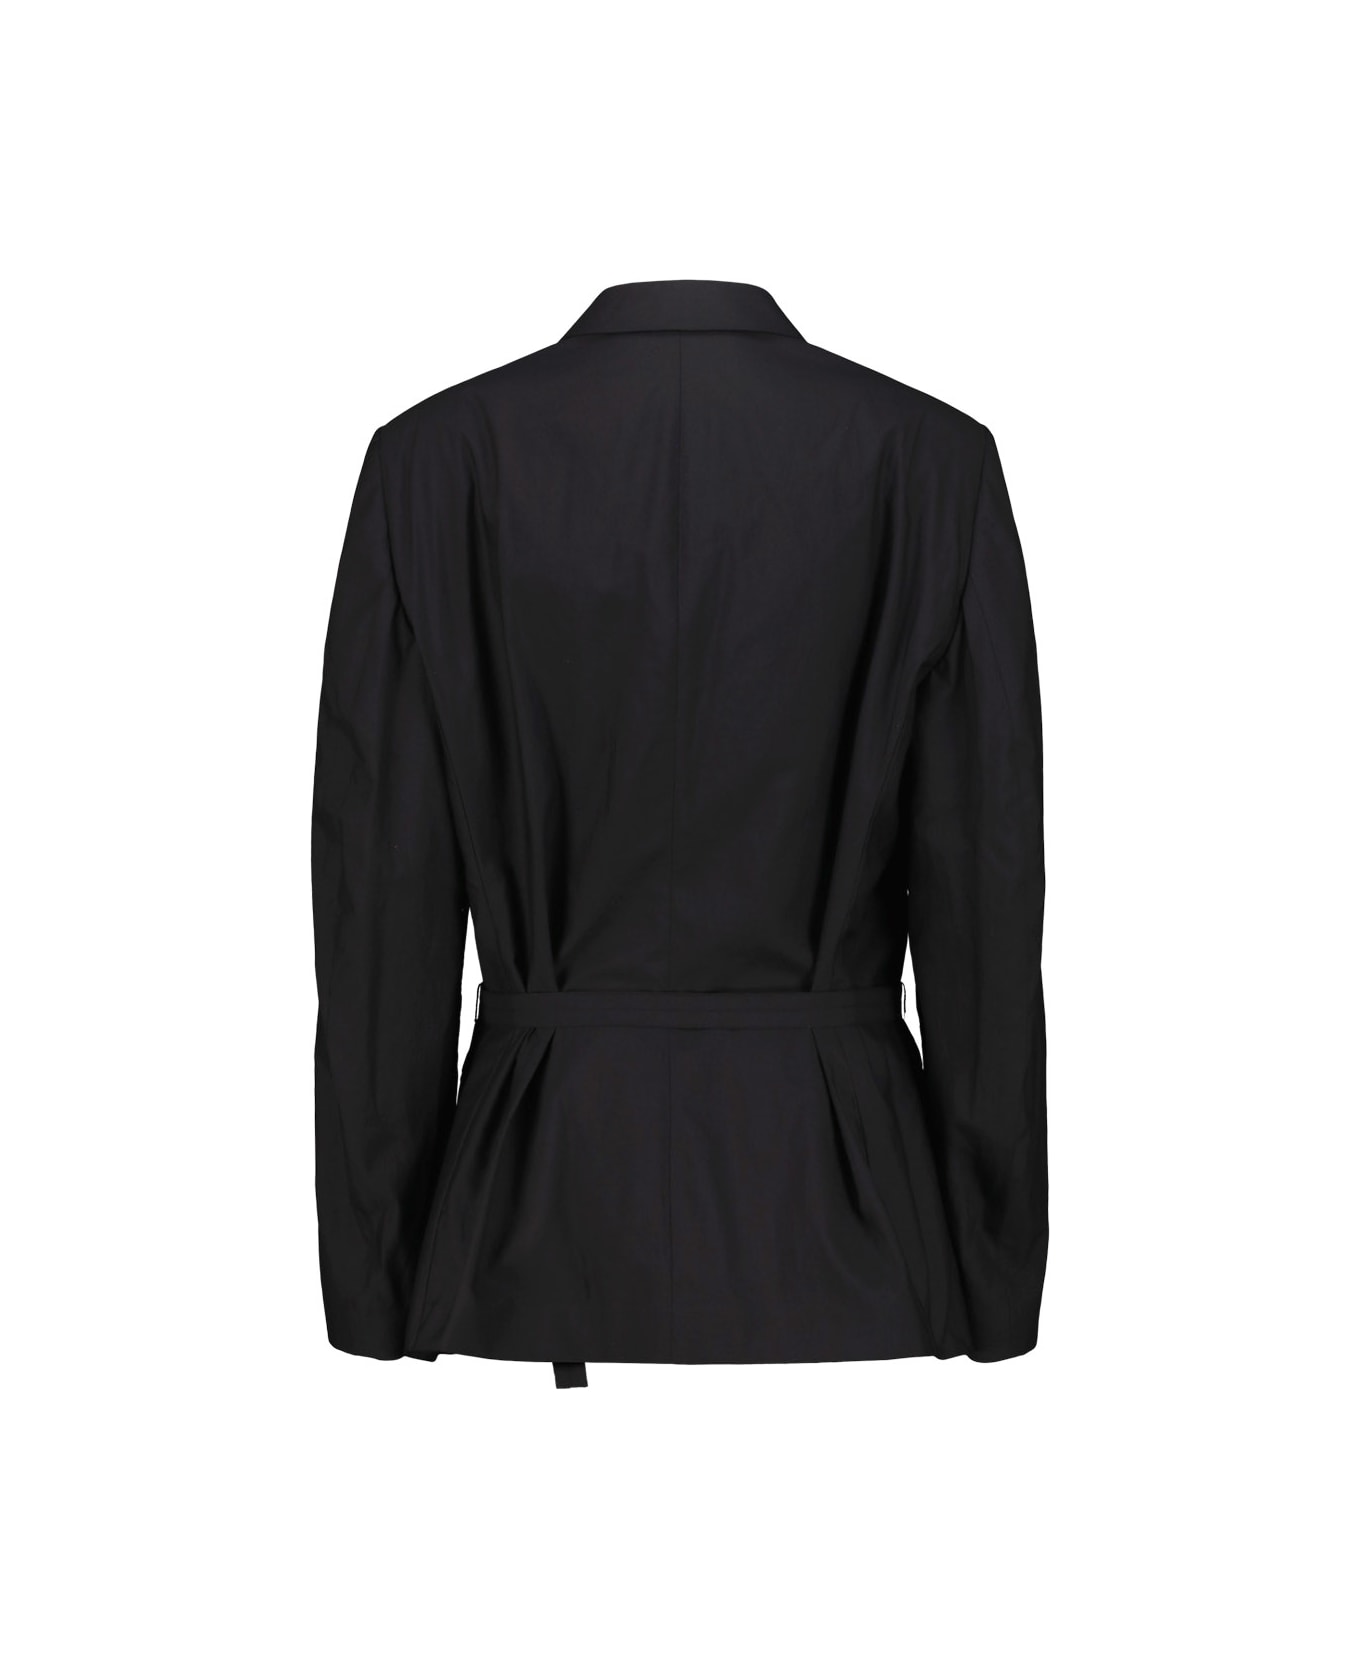 Lemaire Belted Light Tailored Jacket - Black ブレザー